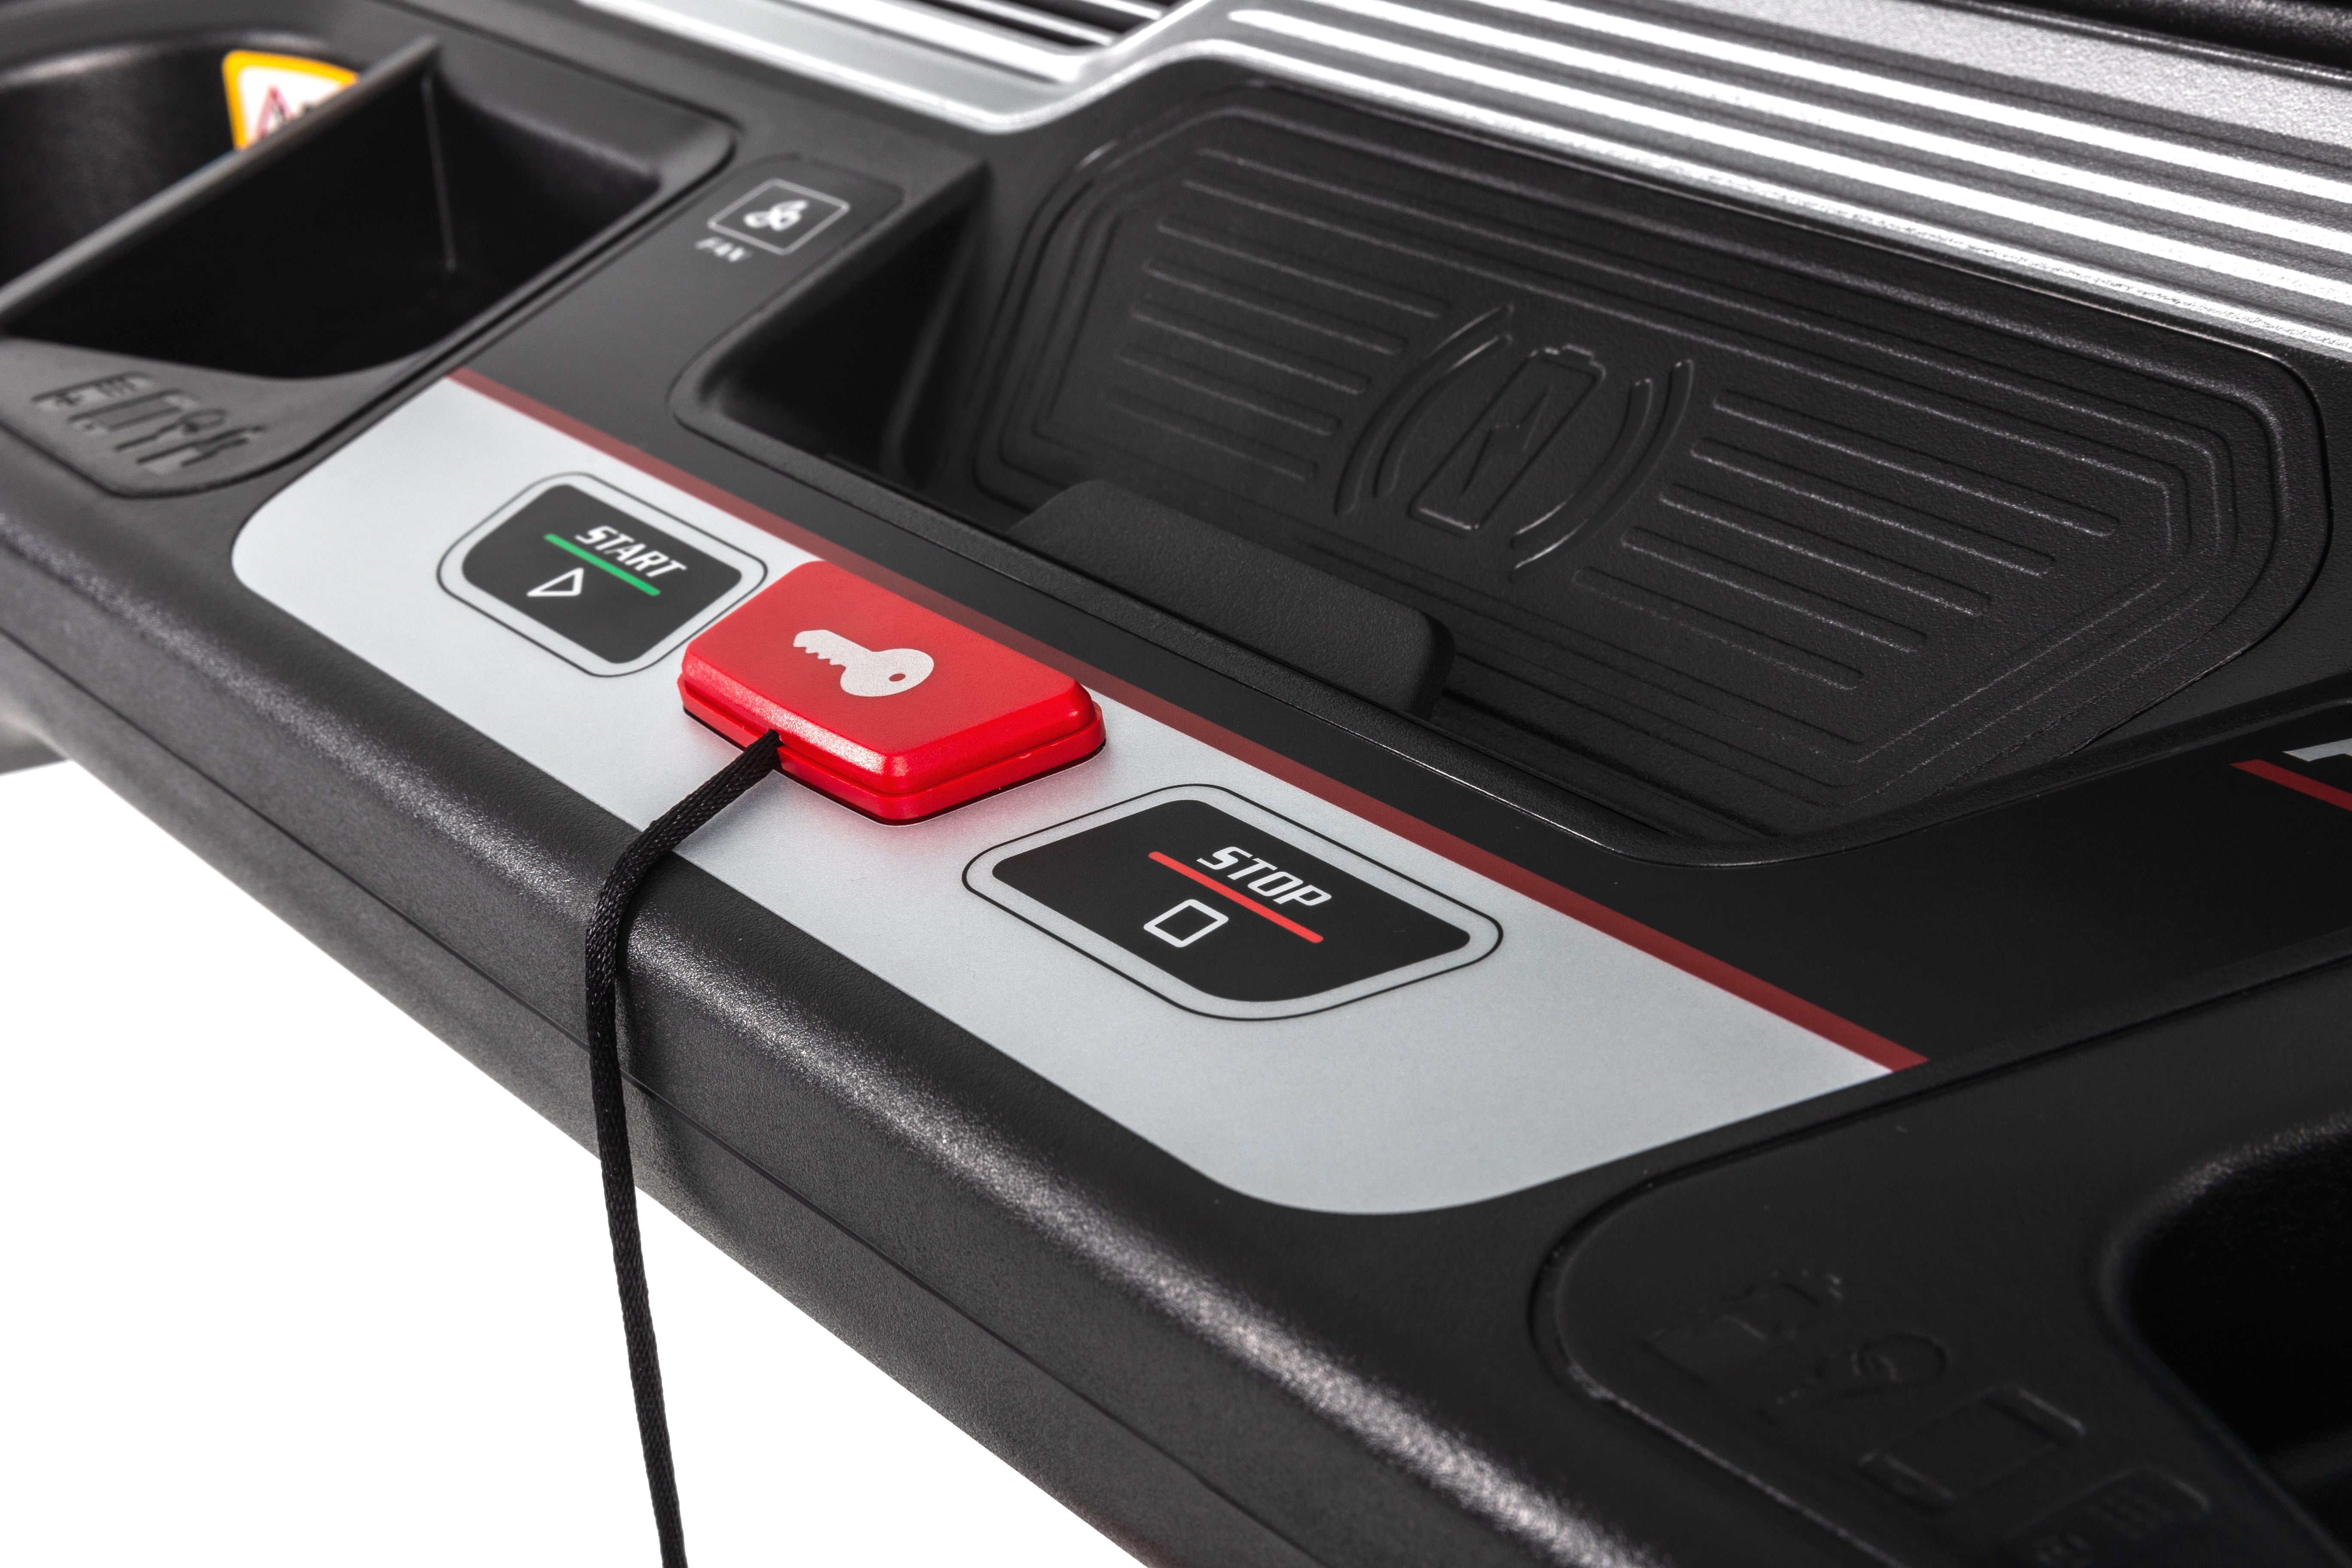 Close-up of the Sole F85 treadmill's central console area, showcasing the wireless charging pad with a circular logo, air vents, a red "Start" button, a black "Stop" button, and the F85 model label on the side.